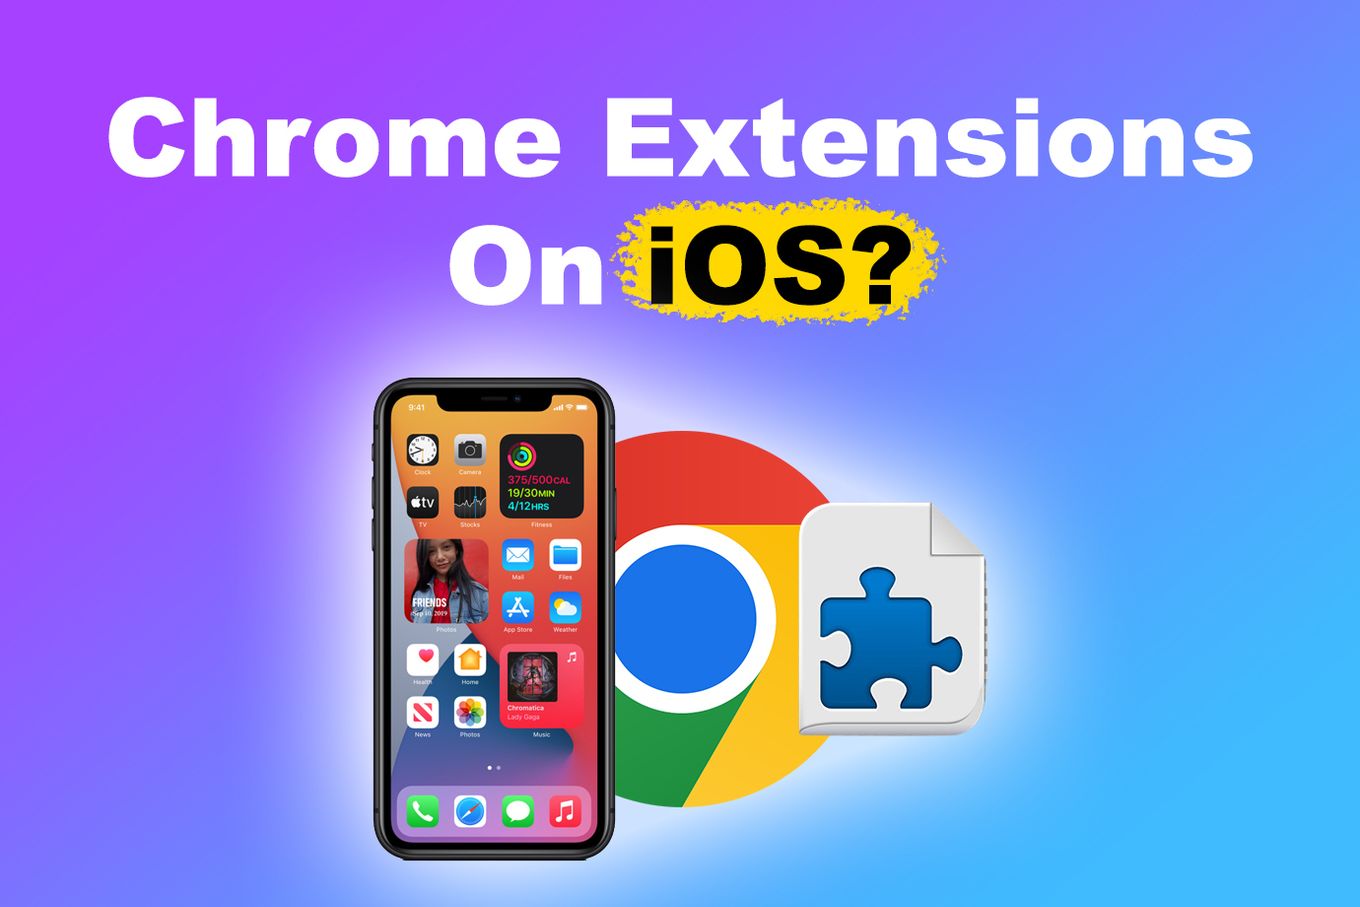 Chrome Extensions on iOS